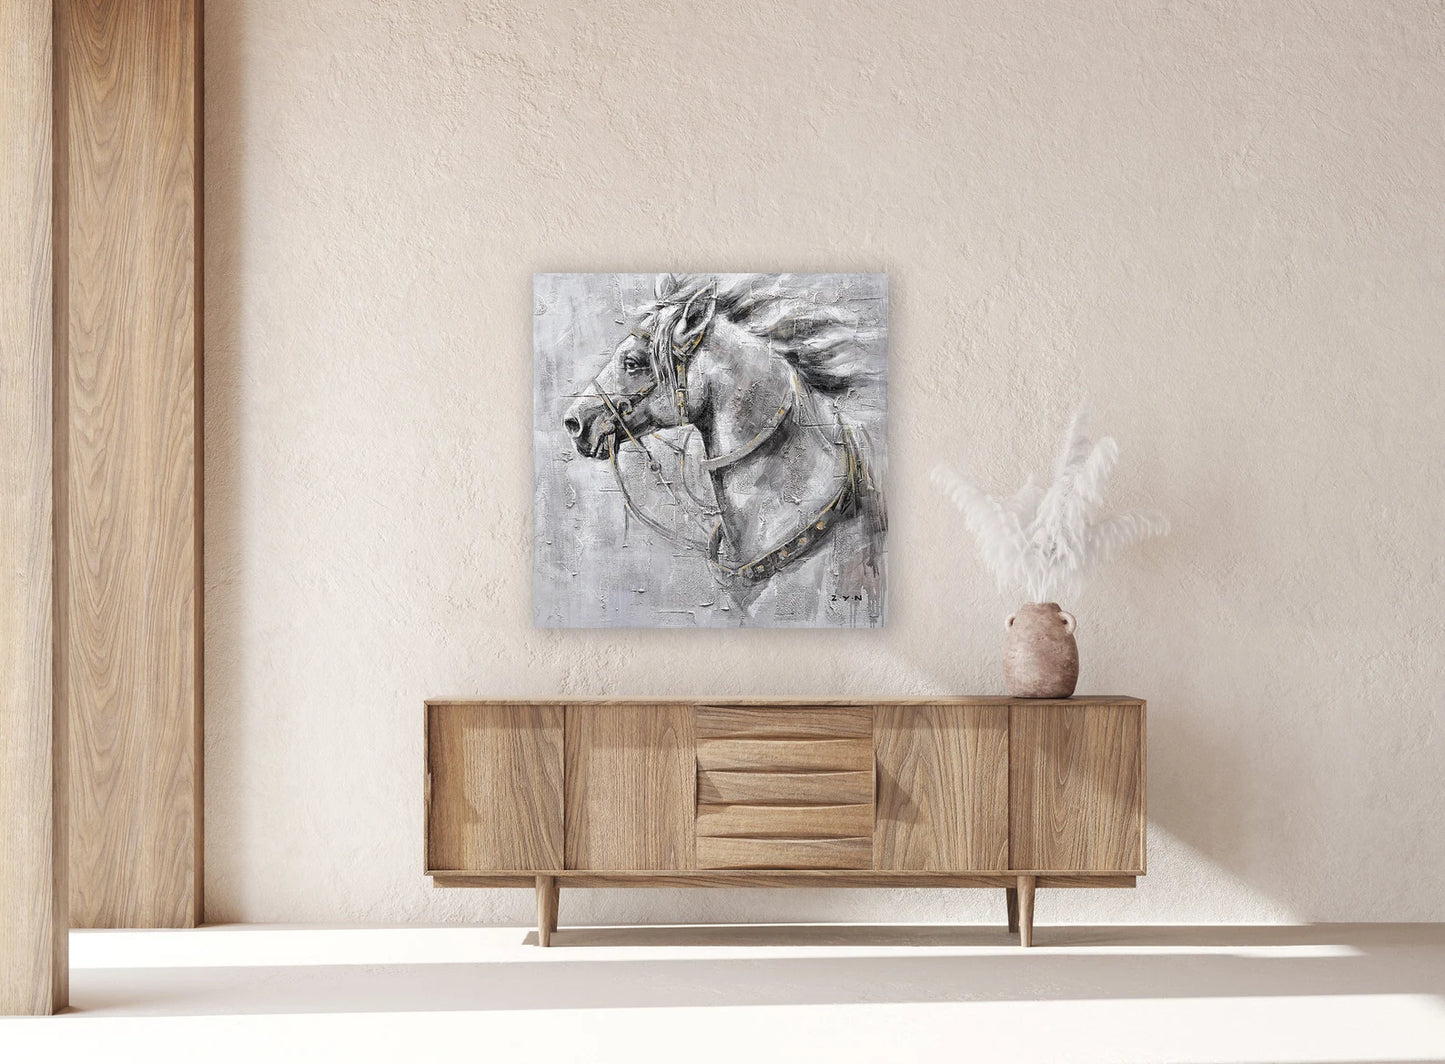 Hand-painted Art "Brave horse" Oil painting original, Canvas Wall art for living room, bedroom, office - Wrapped Canvas Painting